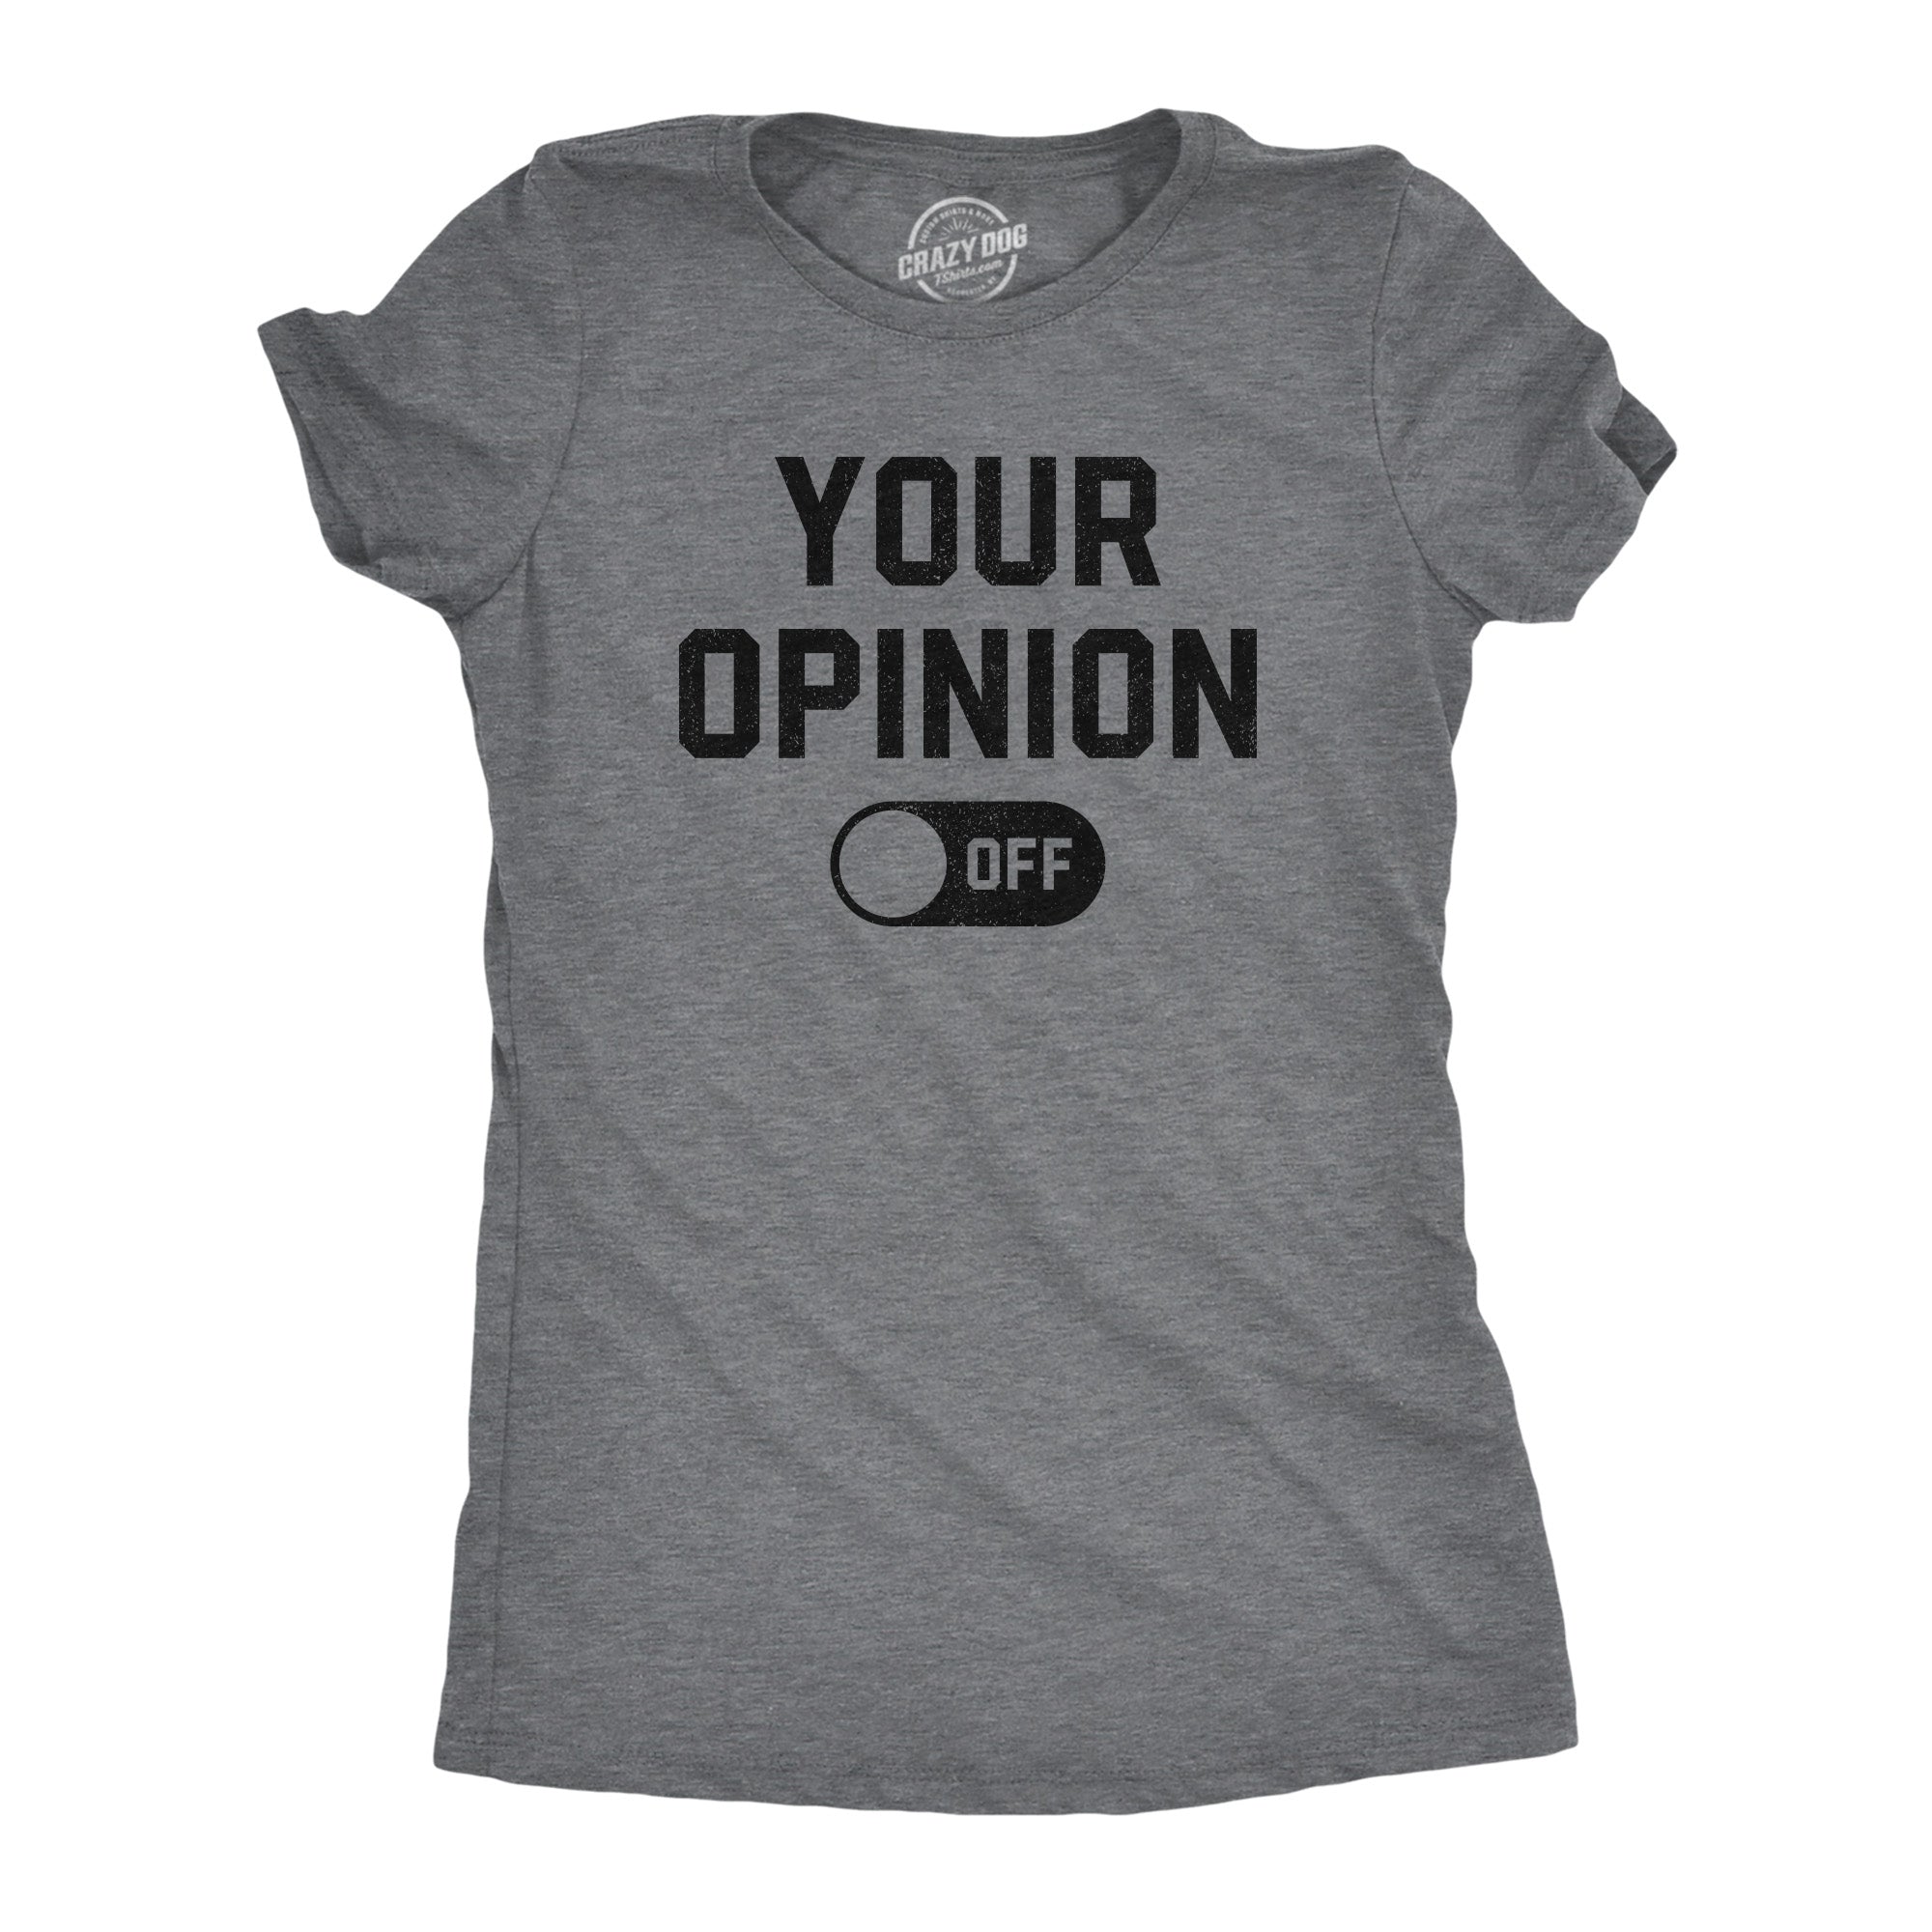 Funny Dark Heather Grey - OPINION Your Opinion Off Womens T Shirt Nerdy Sarcastic Tee